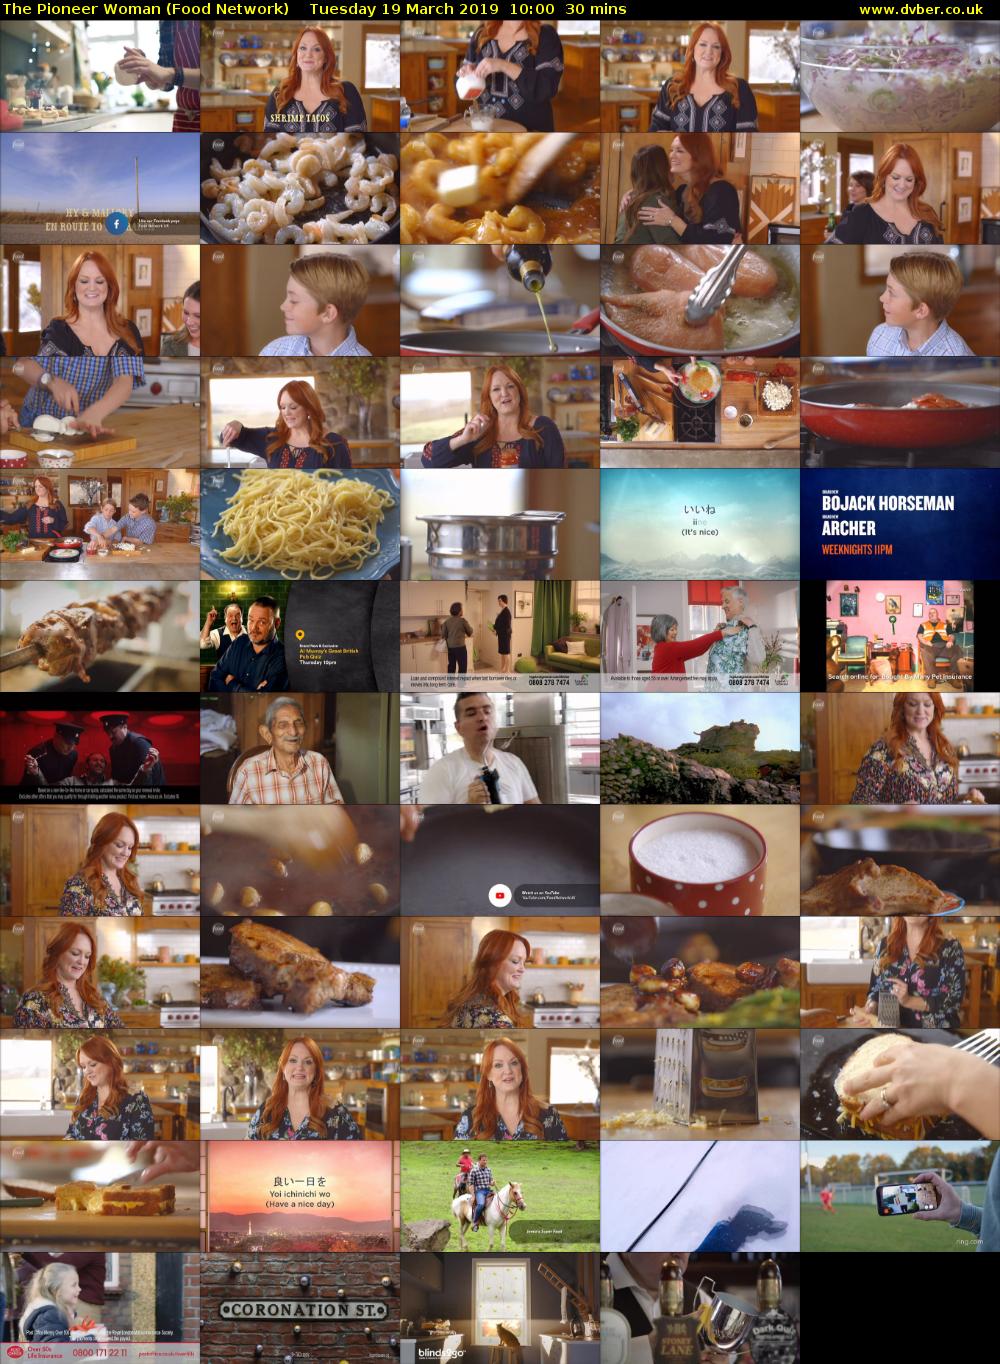 The Pioneer Woman (Food Network) Tuesday 19 March 2019 10:00 - 10:30